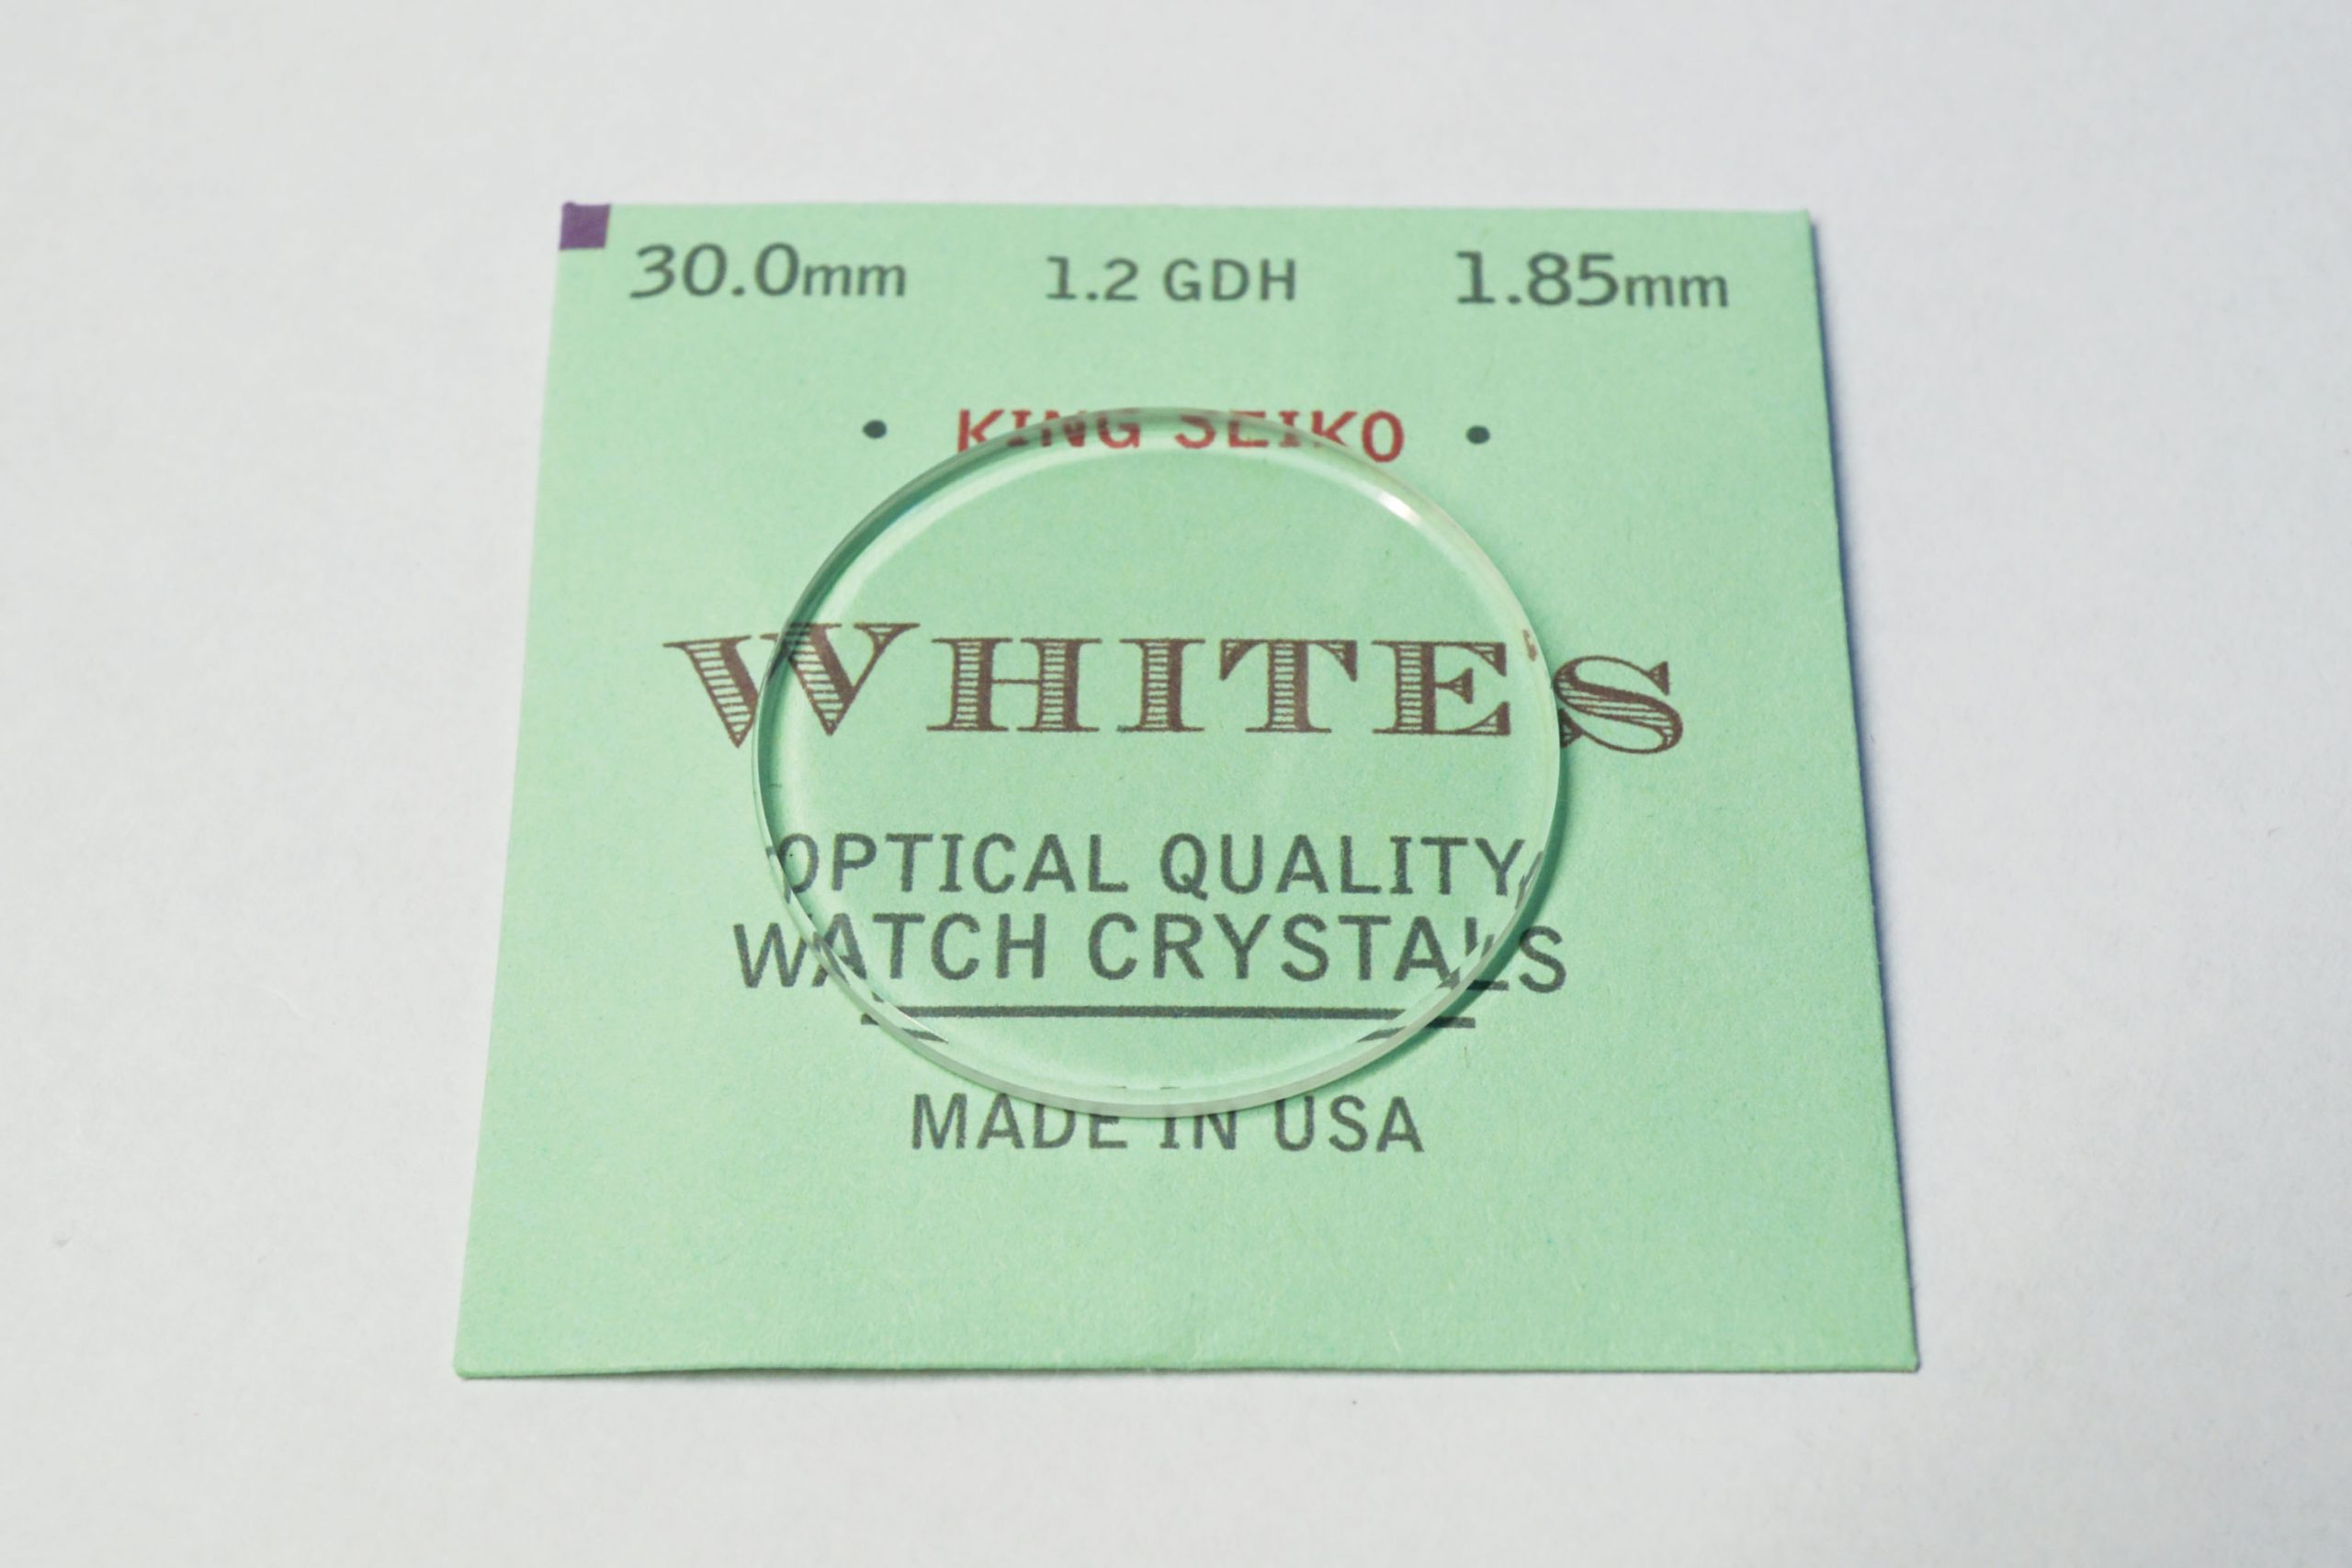 William White's replacement crystals